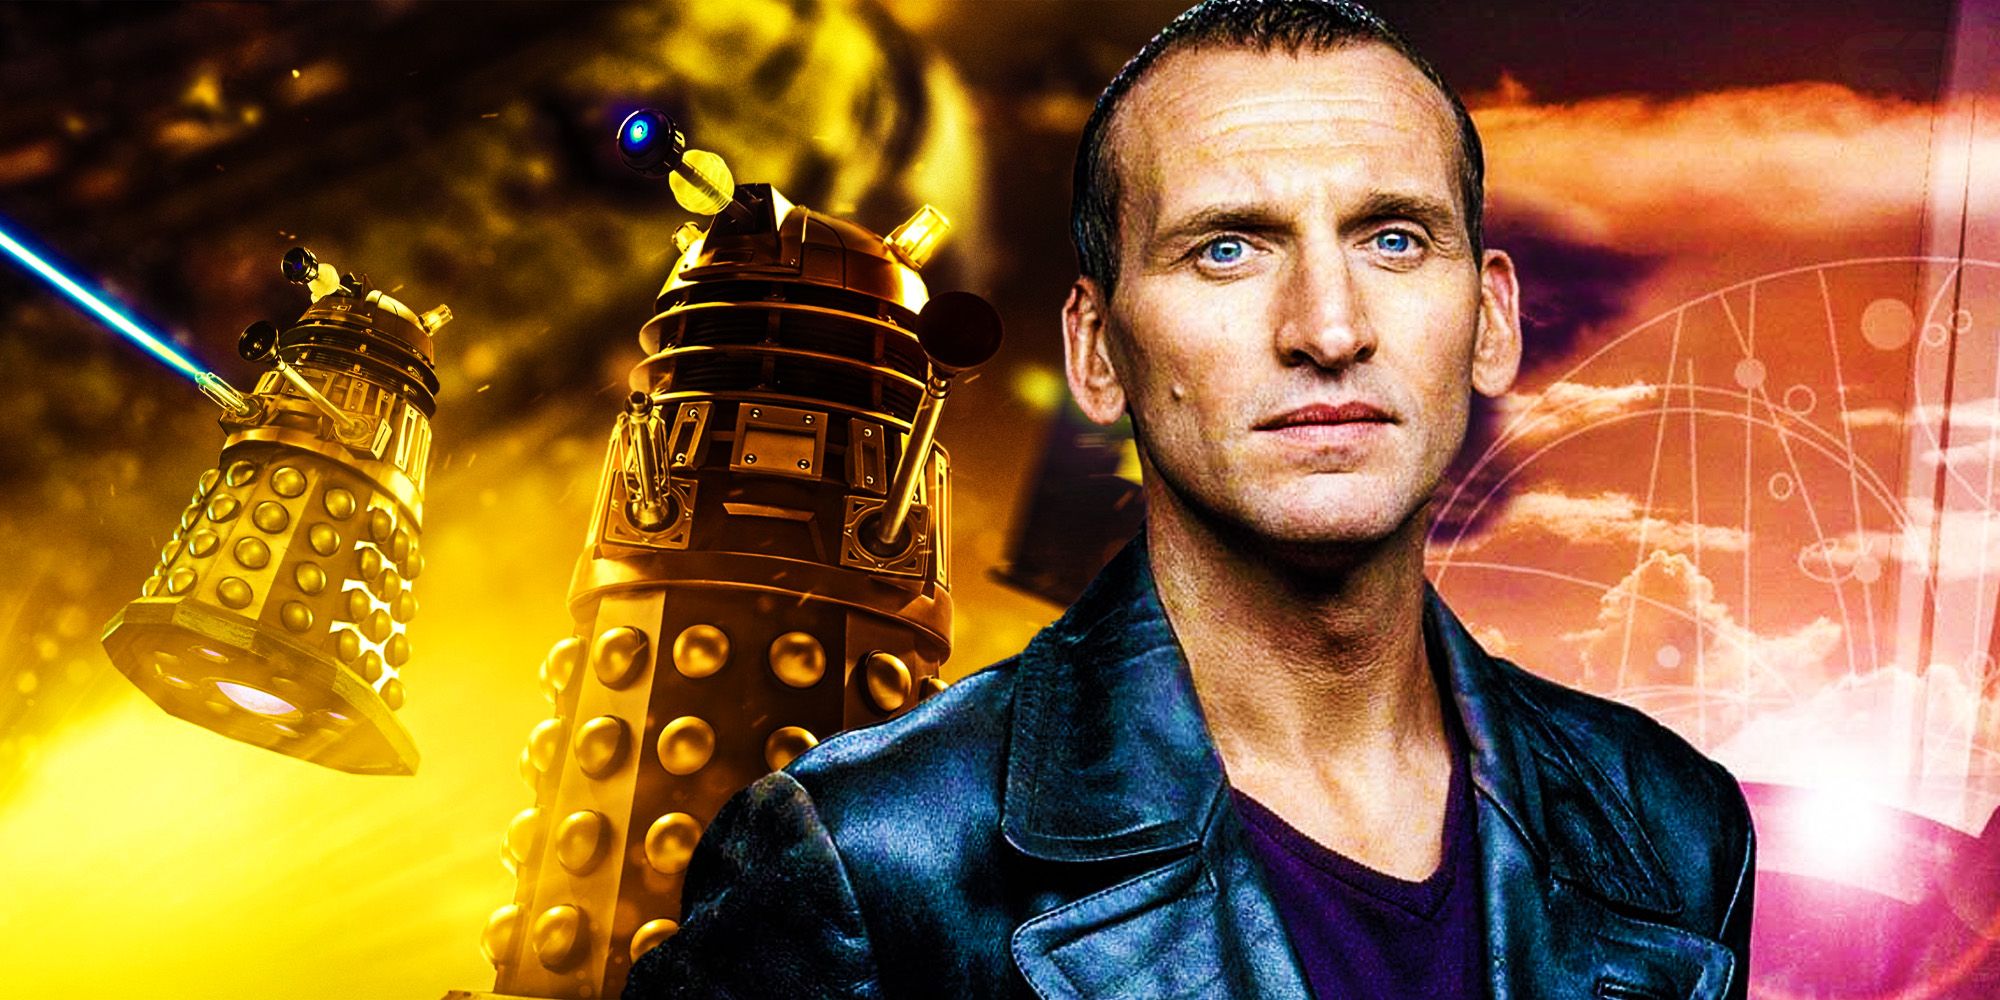 A collage of the Ninth Doctor and a Dalek in Doctor Who